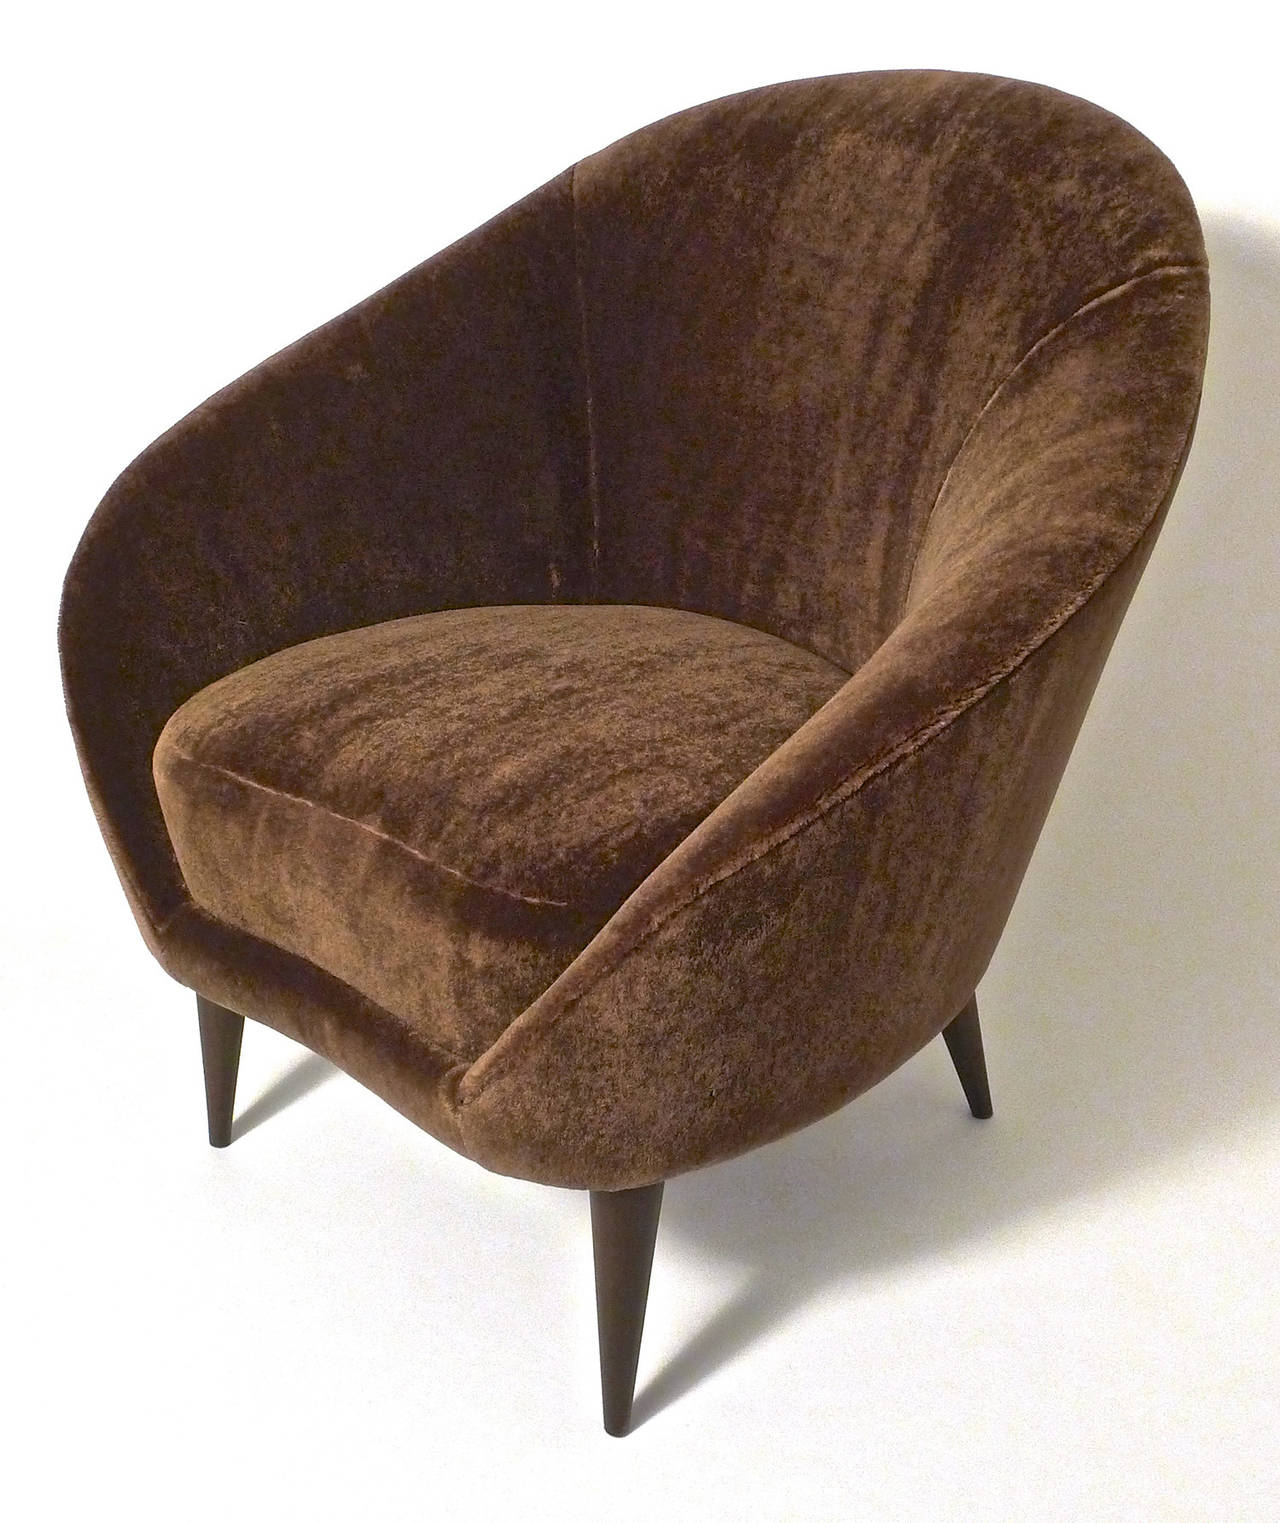 Beautiful to look at and perfectly comfortable.
Just reupholstered in wool mohair.